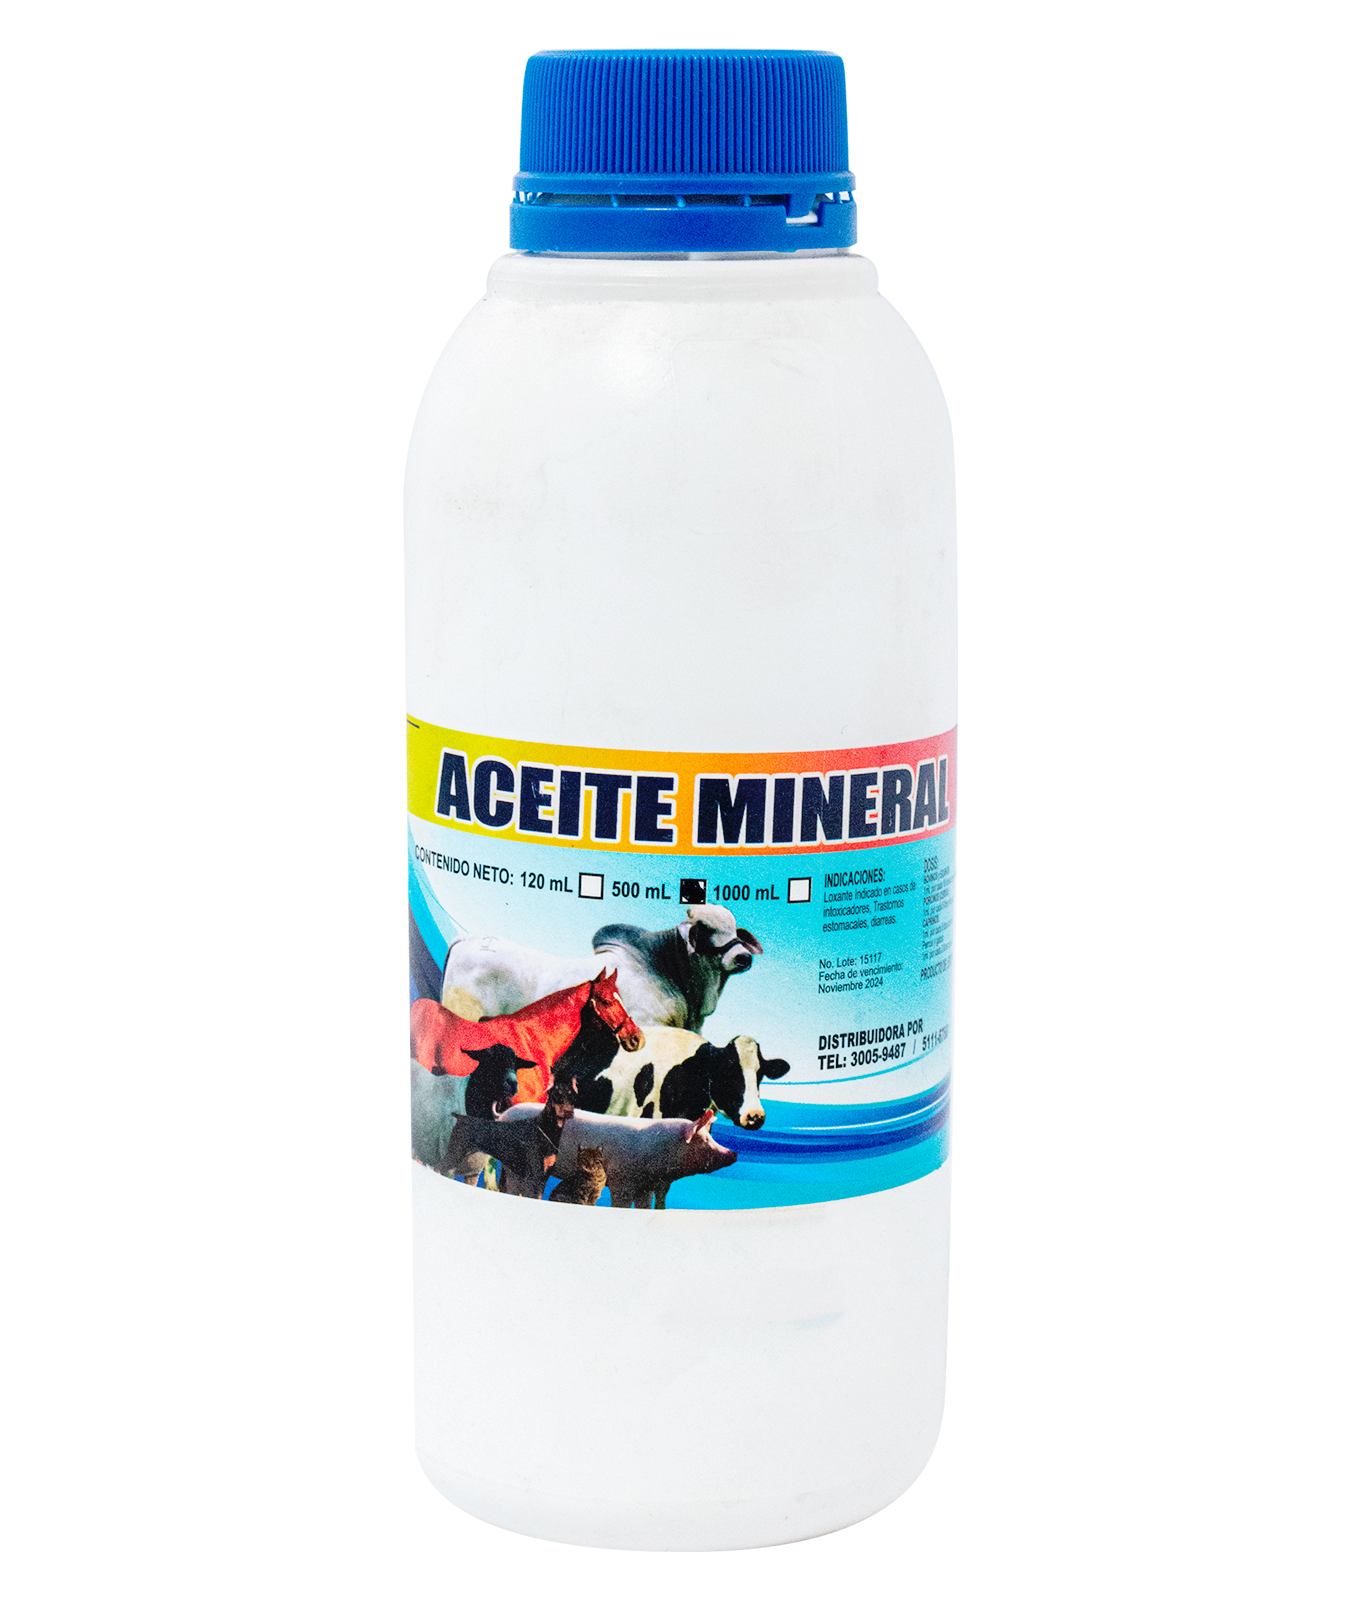 ACEITE MINERAL 500 ML